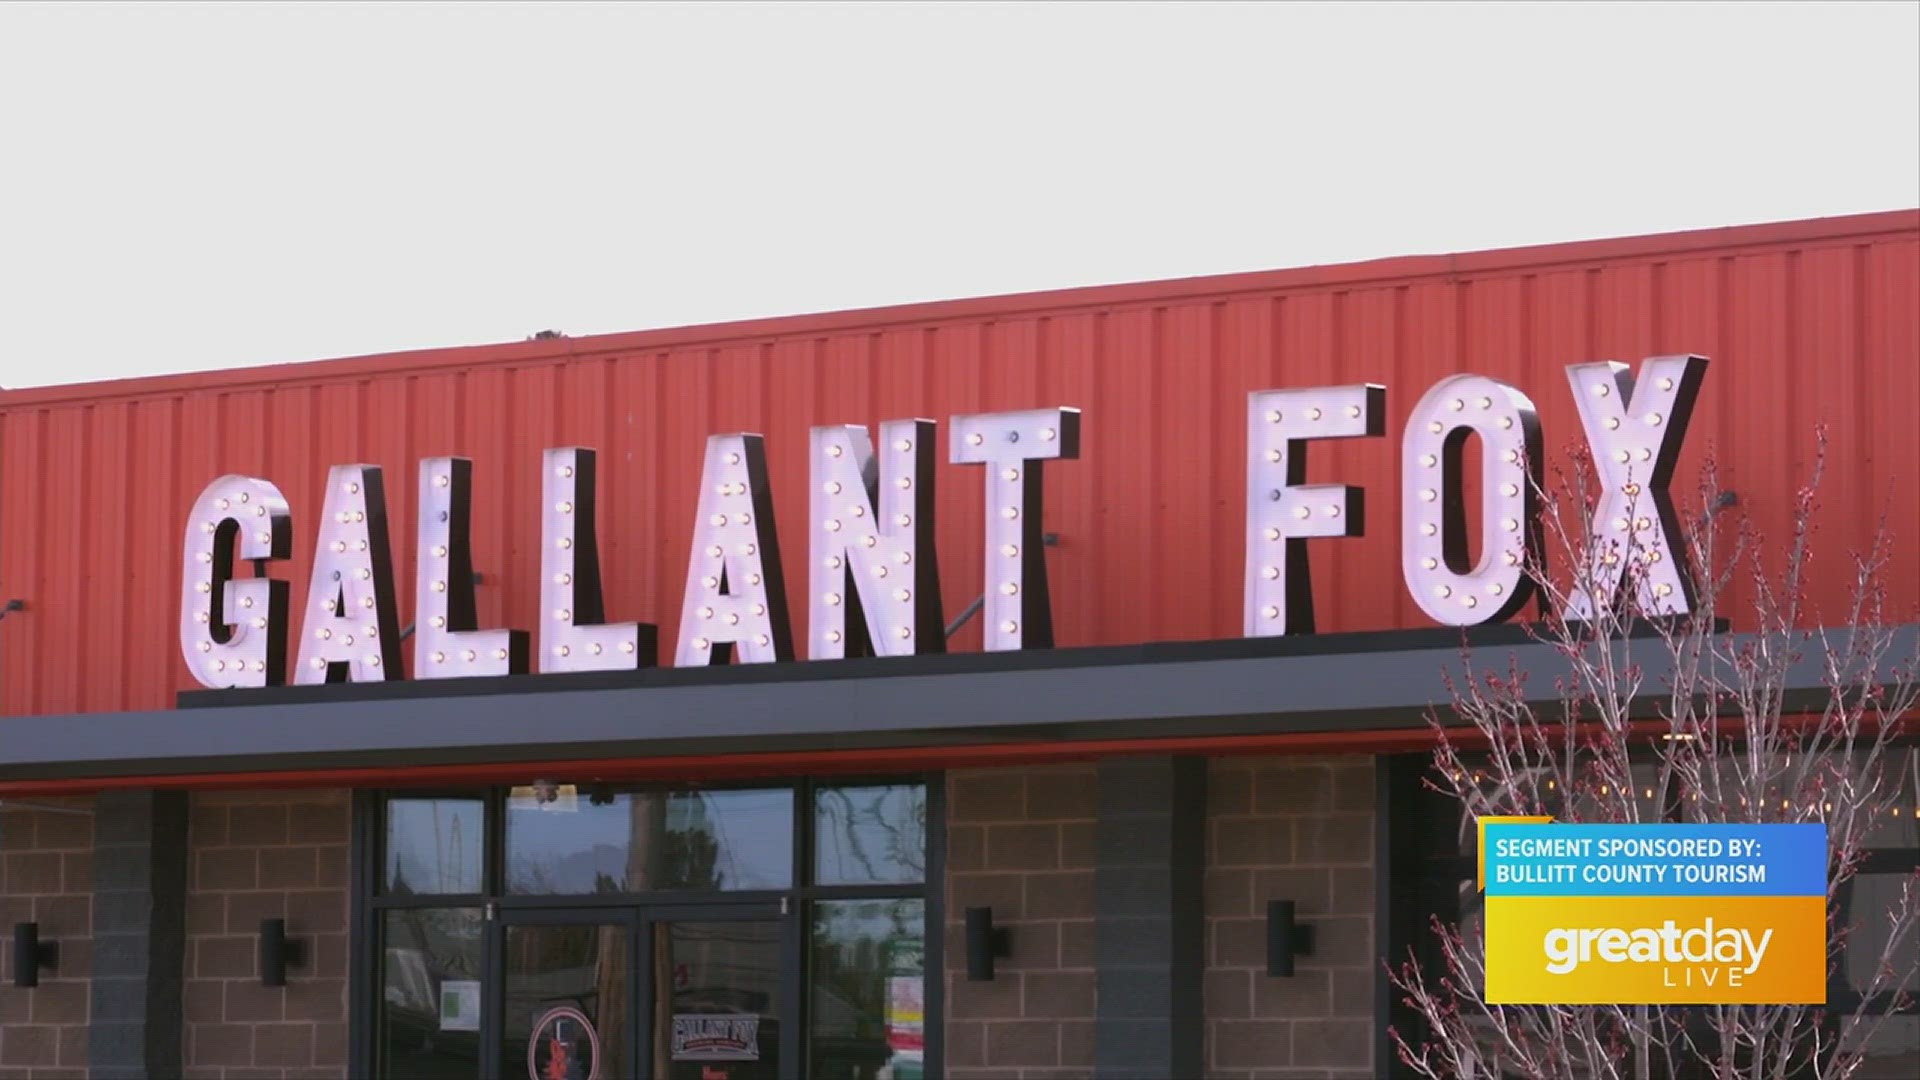 Gallant Fox has a great brewing for customers to enjoy!